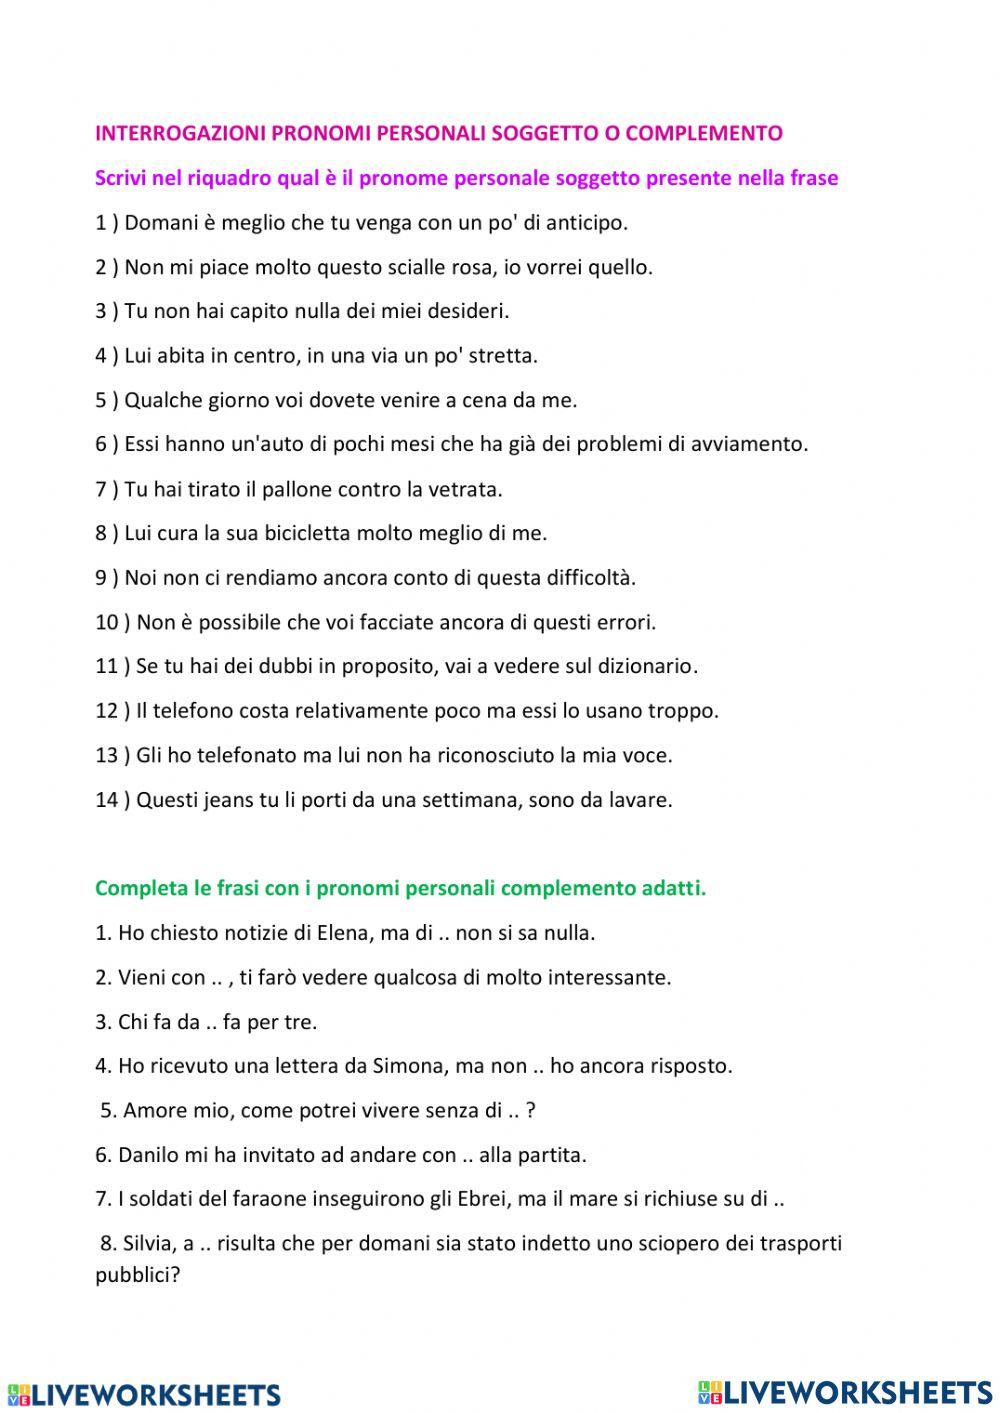 pronomi personali soggetto-complemento oggetto online exercise for | Live  Worksheets